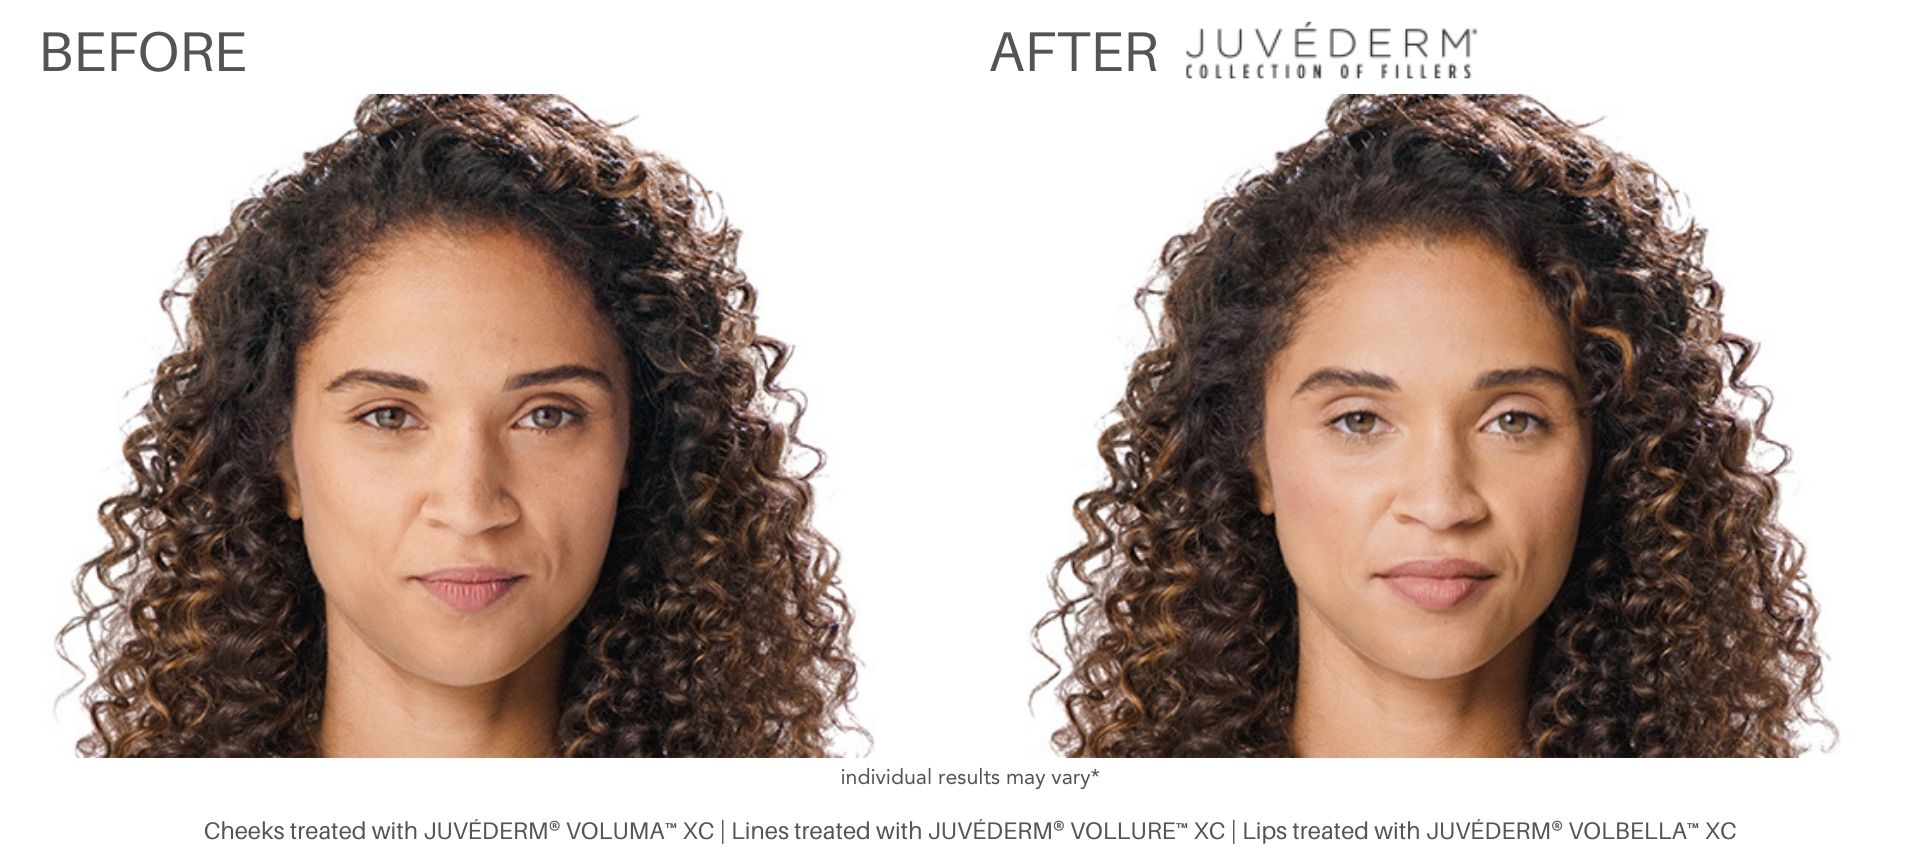 Juvéderm before and after pictures